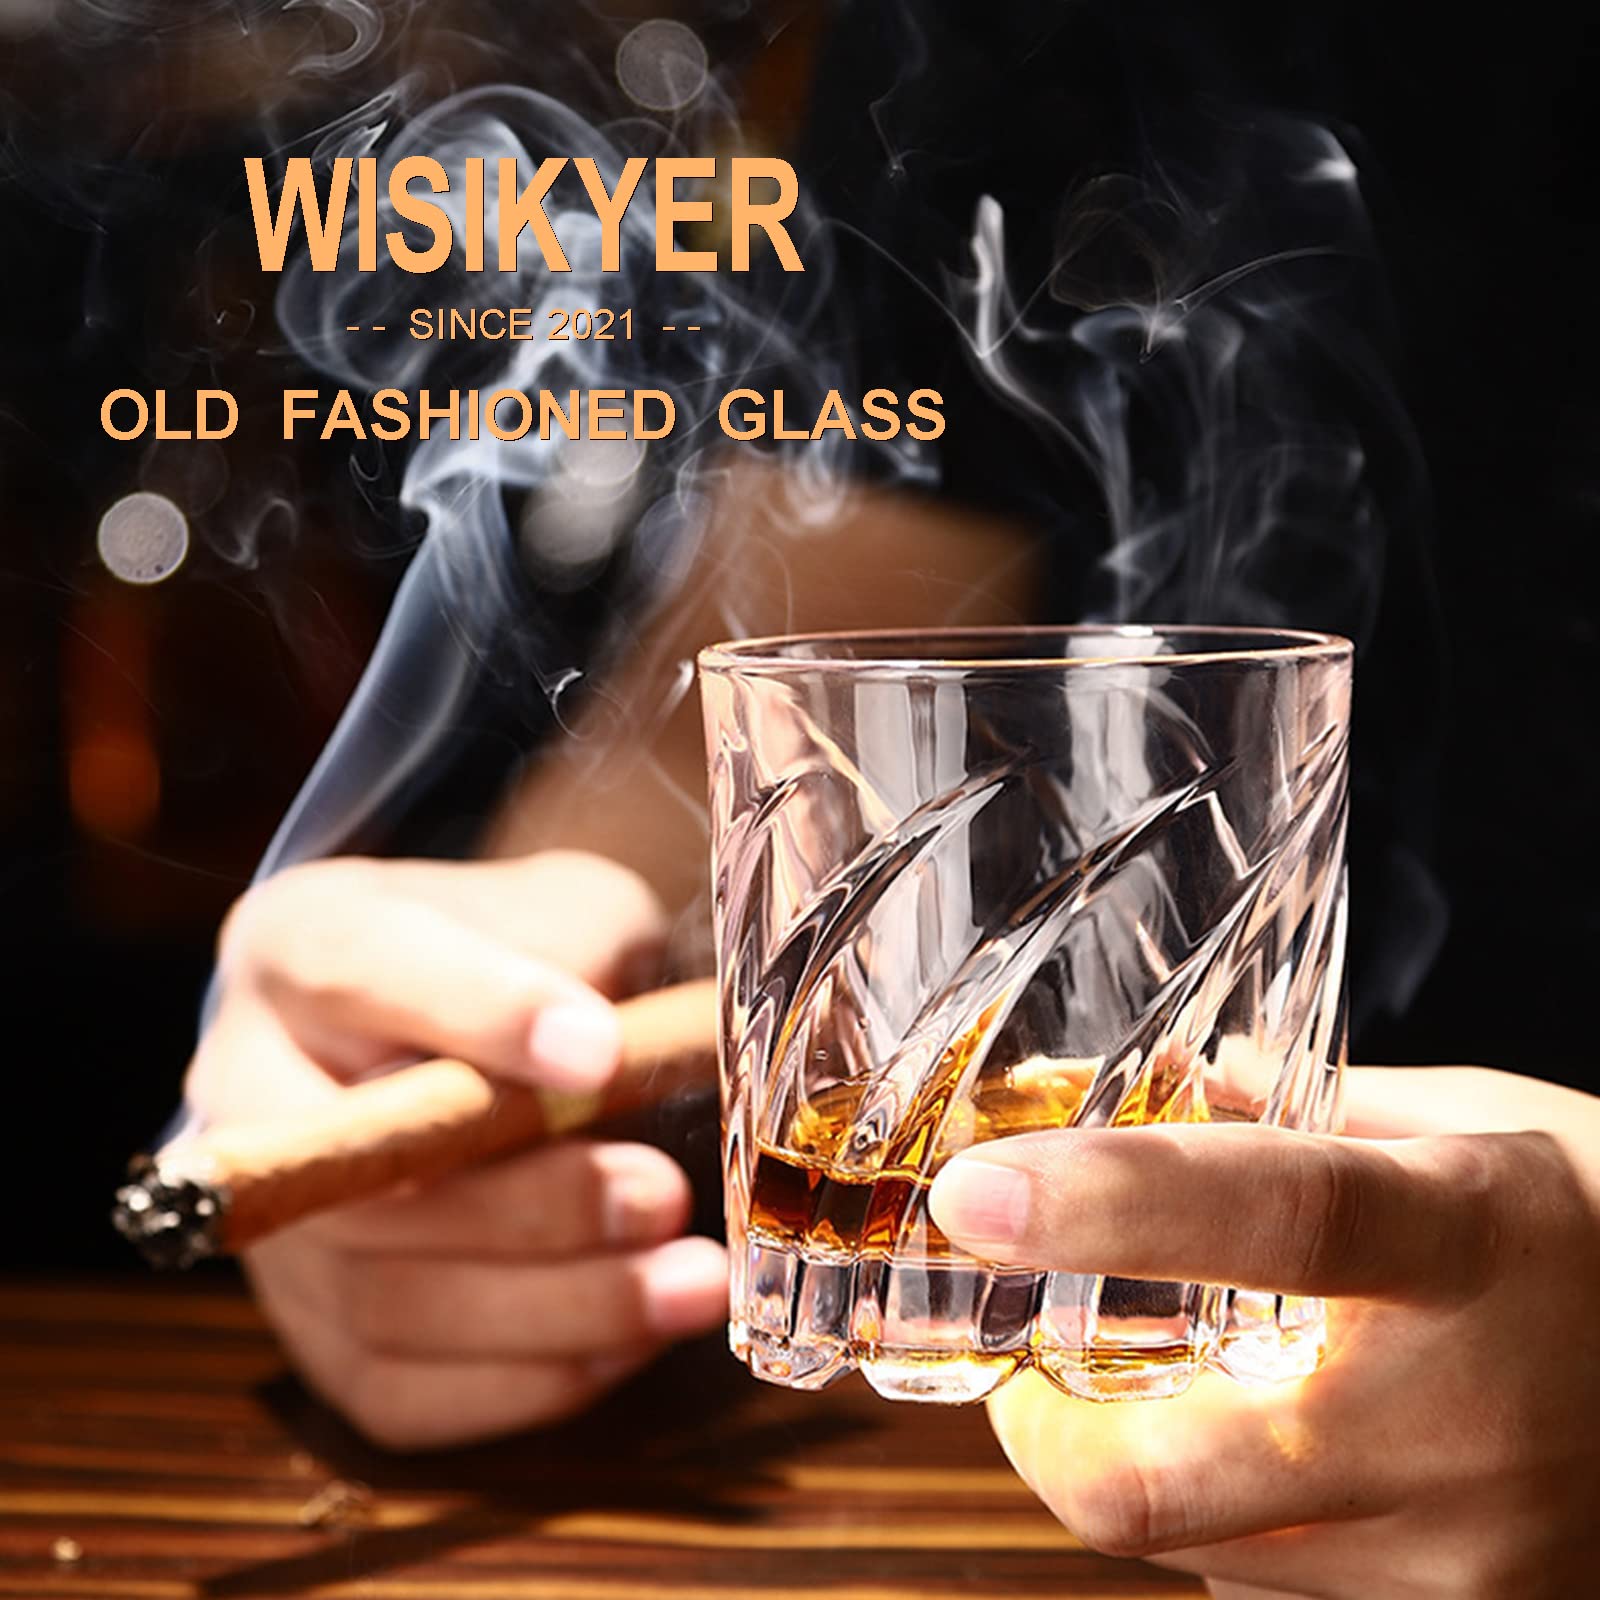 WISIKYER Whiskey Glasses Set 4, Spinning Bourbon Glass with Luxury Box Rotating Old Fashioned Rocks Glass Gifts on Birthday/Father's Day/Retirement, Scotch Glass Cup Gifts for Men/Father/Husband